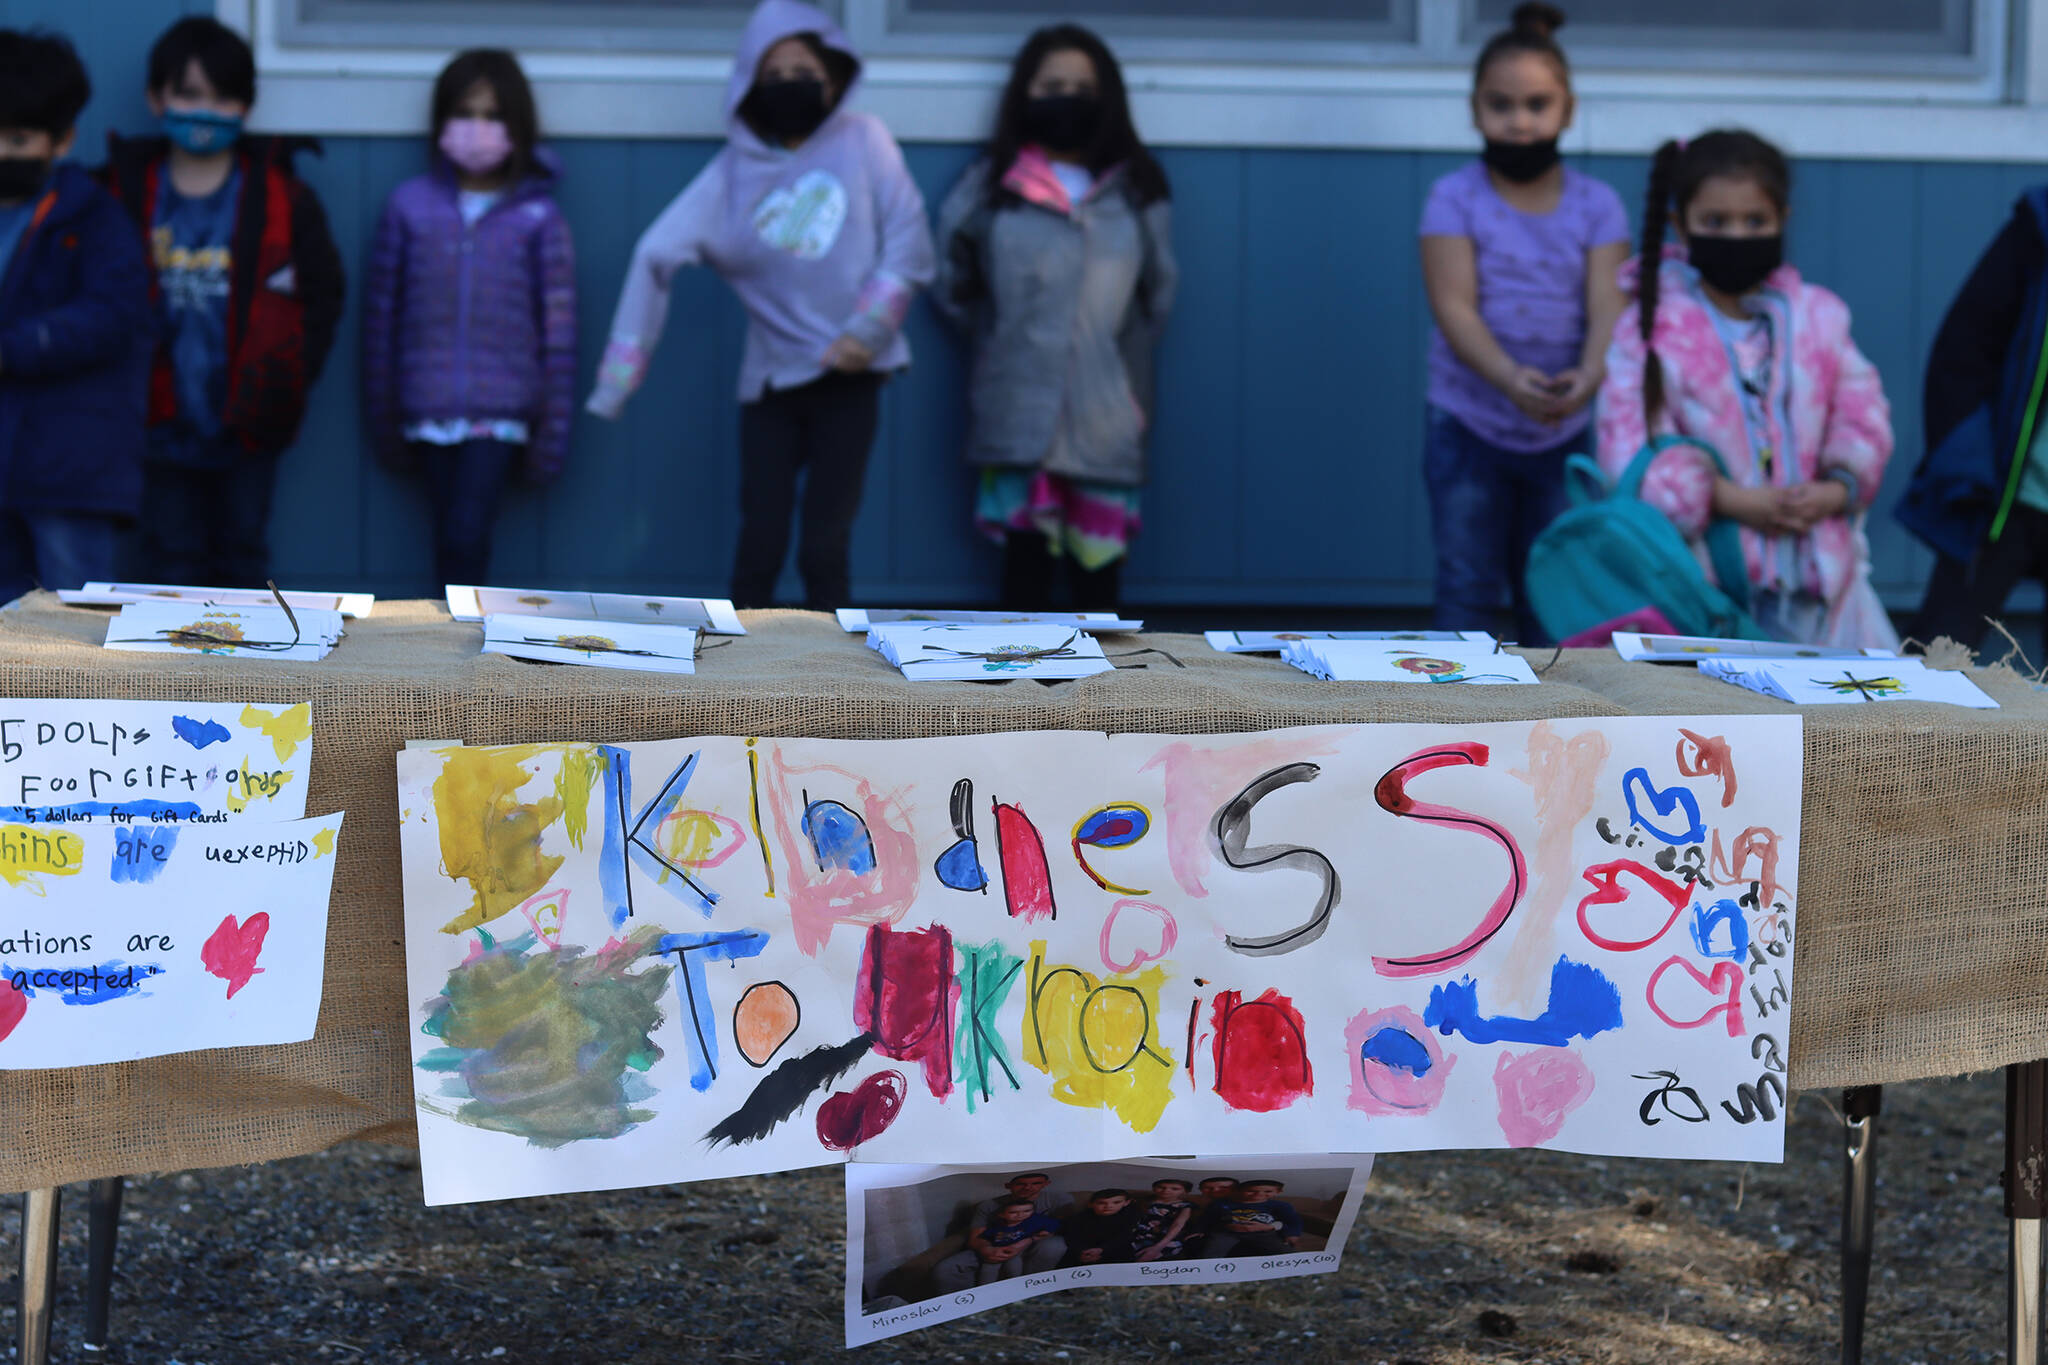 A sign reading “Kindness to Ukraine” marks a place for community members to buy cards to support a displaced Ukrainian family living in Washington state. Friday, Students in Carly Lehnhart’s kindergarten class sold cards decorated with pictures of sunflowers, Ukraine’s national flower, to raise money for the family. (Ben Hohenstatt / Juneau Empire)